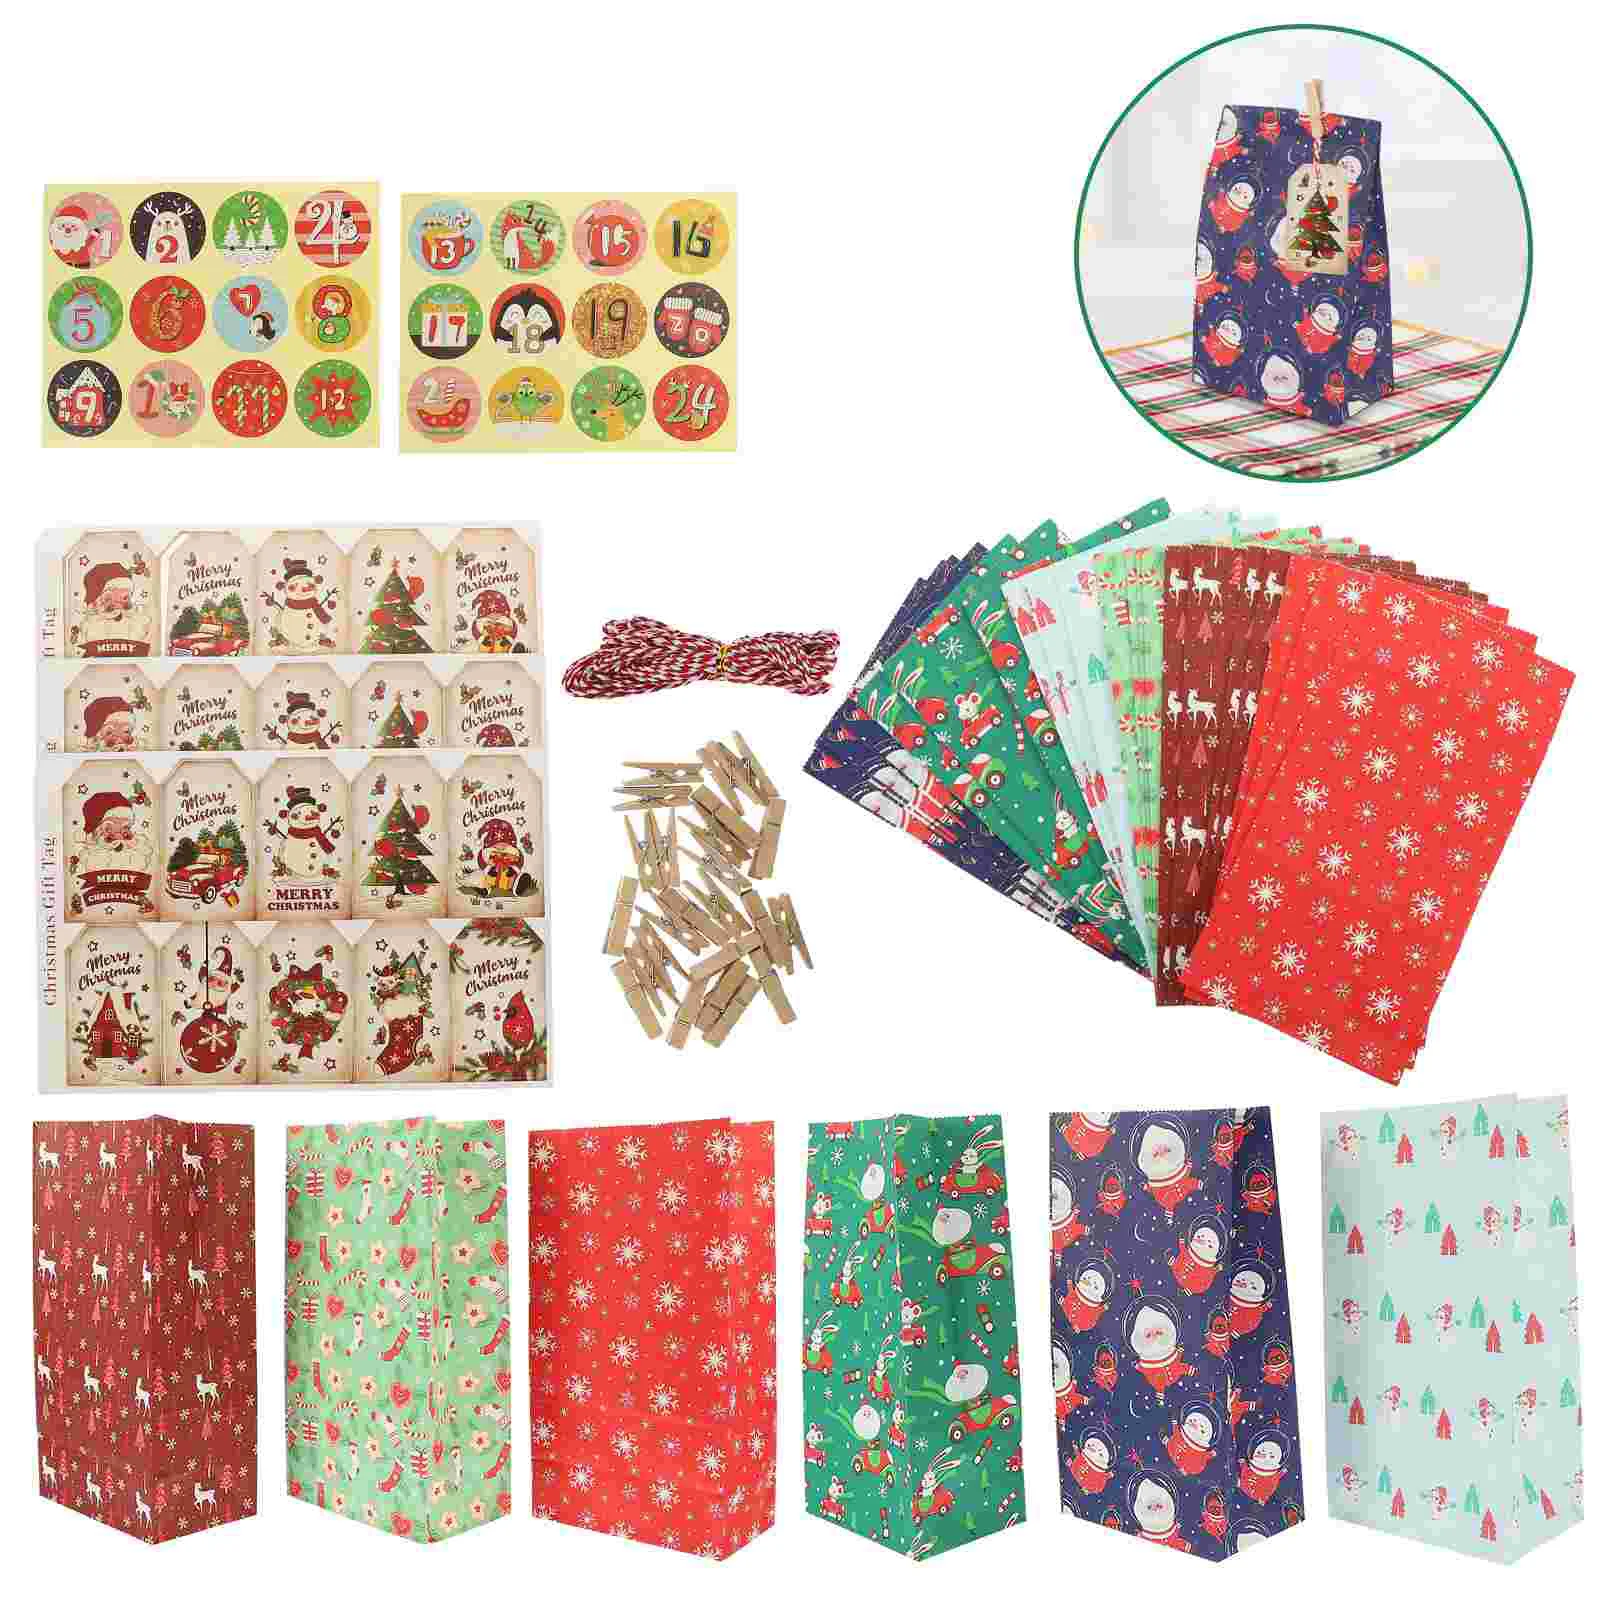 

De Adviento Christmas Paper Bag Snack Bags Wrapping Gift Small Cookie Treat Goodie